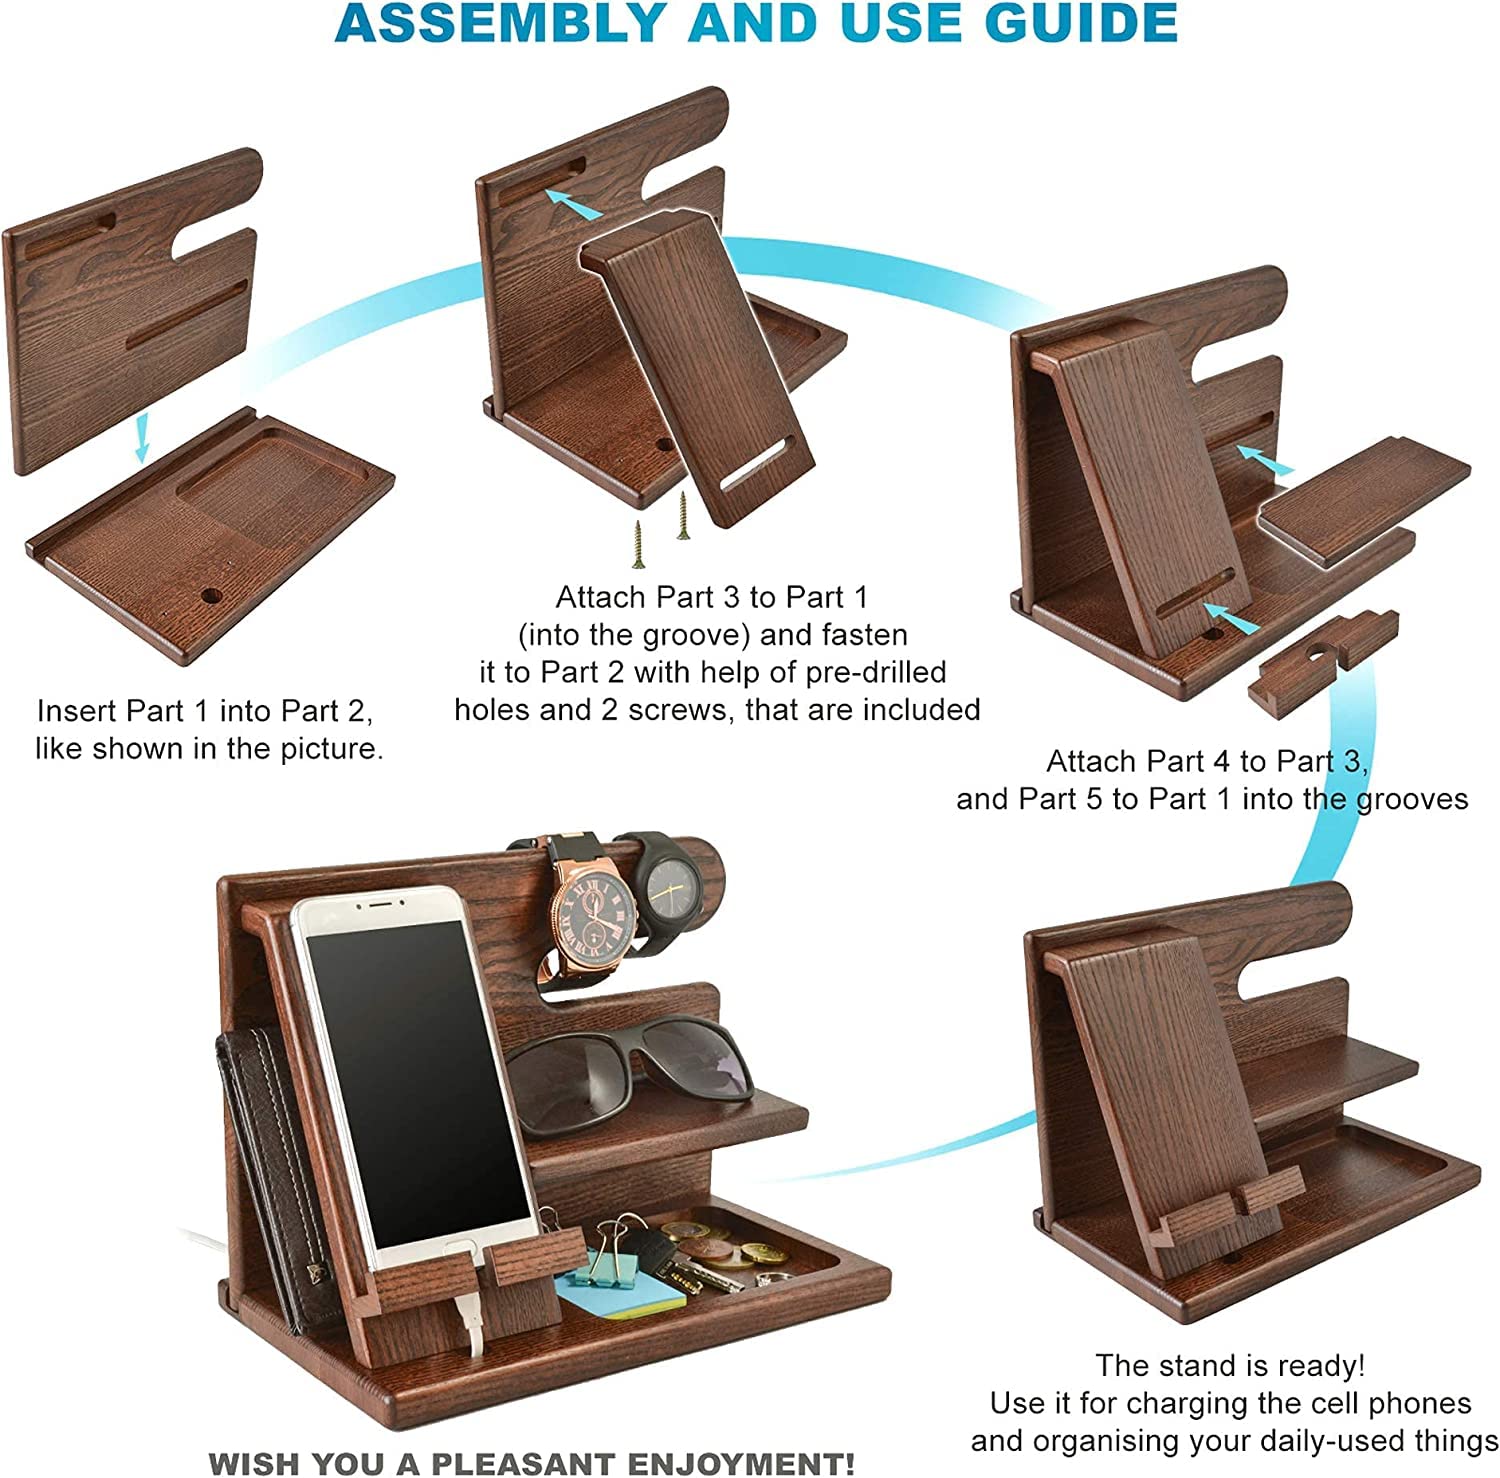 Assembly and use guide